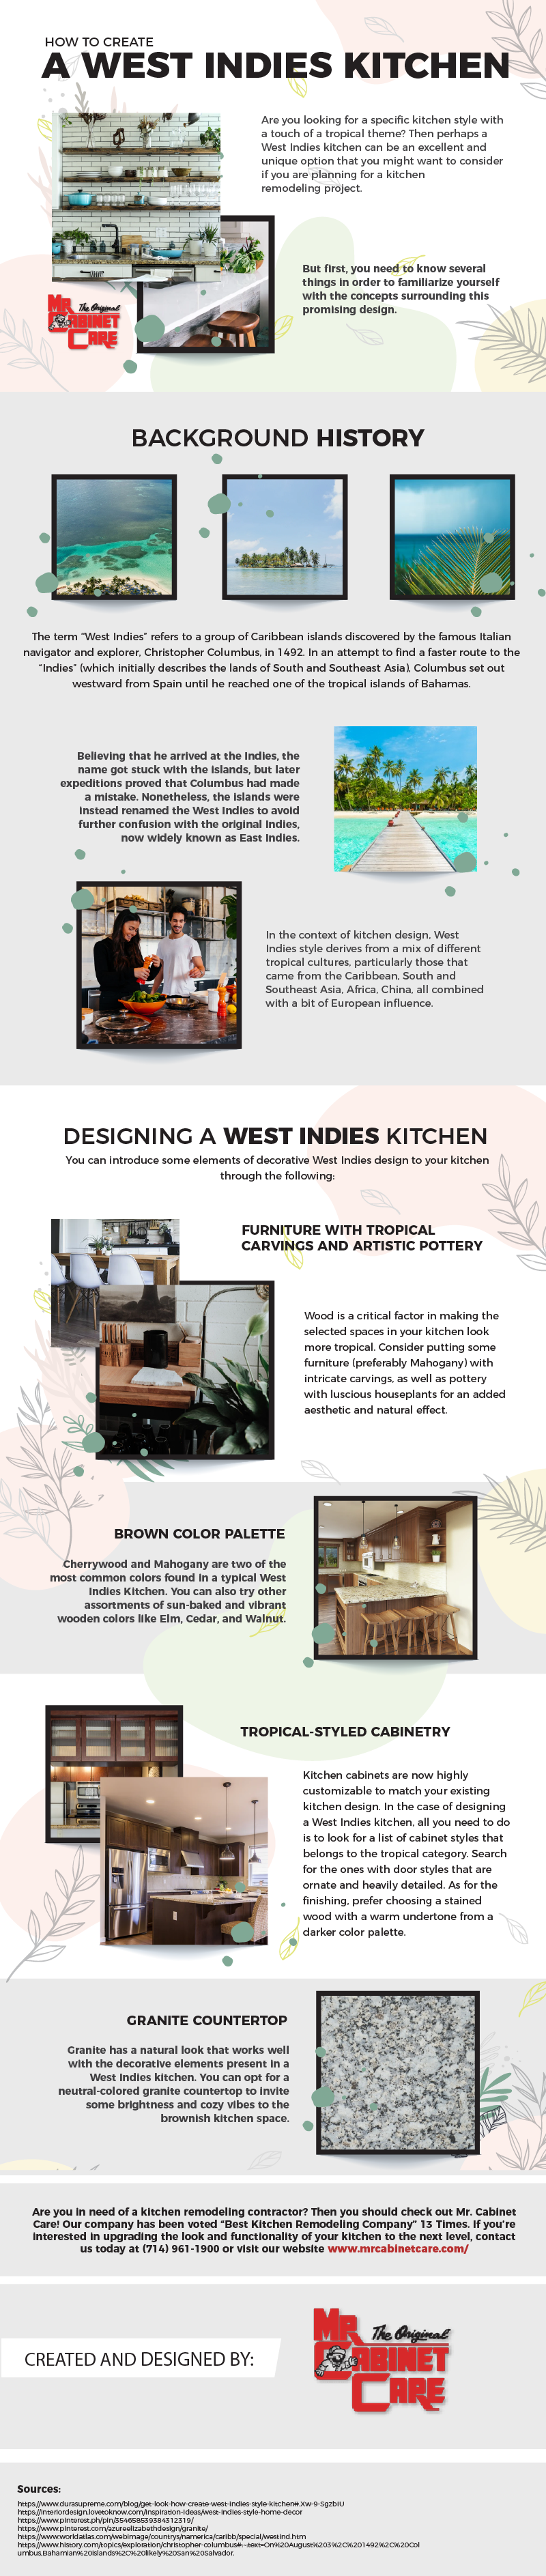 How to Create a West Indies Kitchen - Infographic